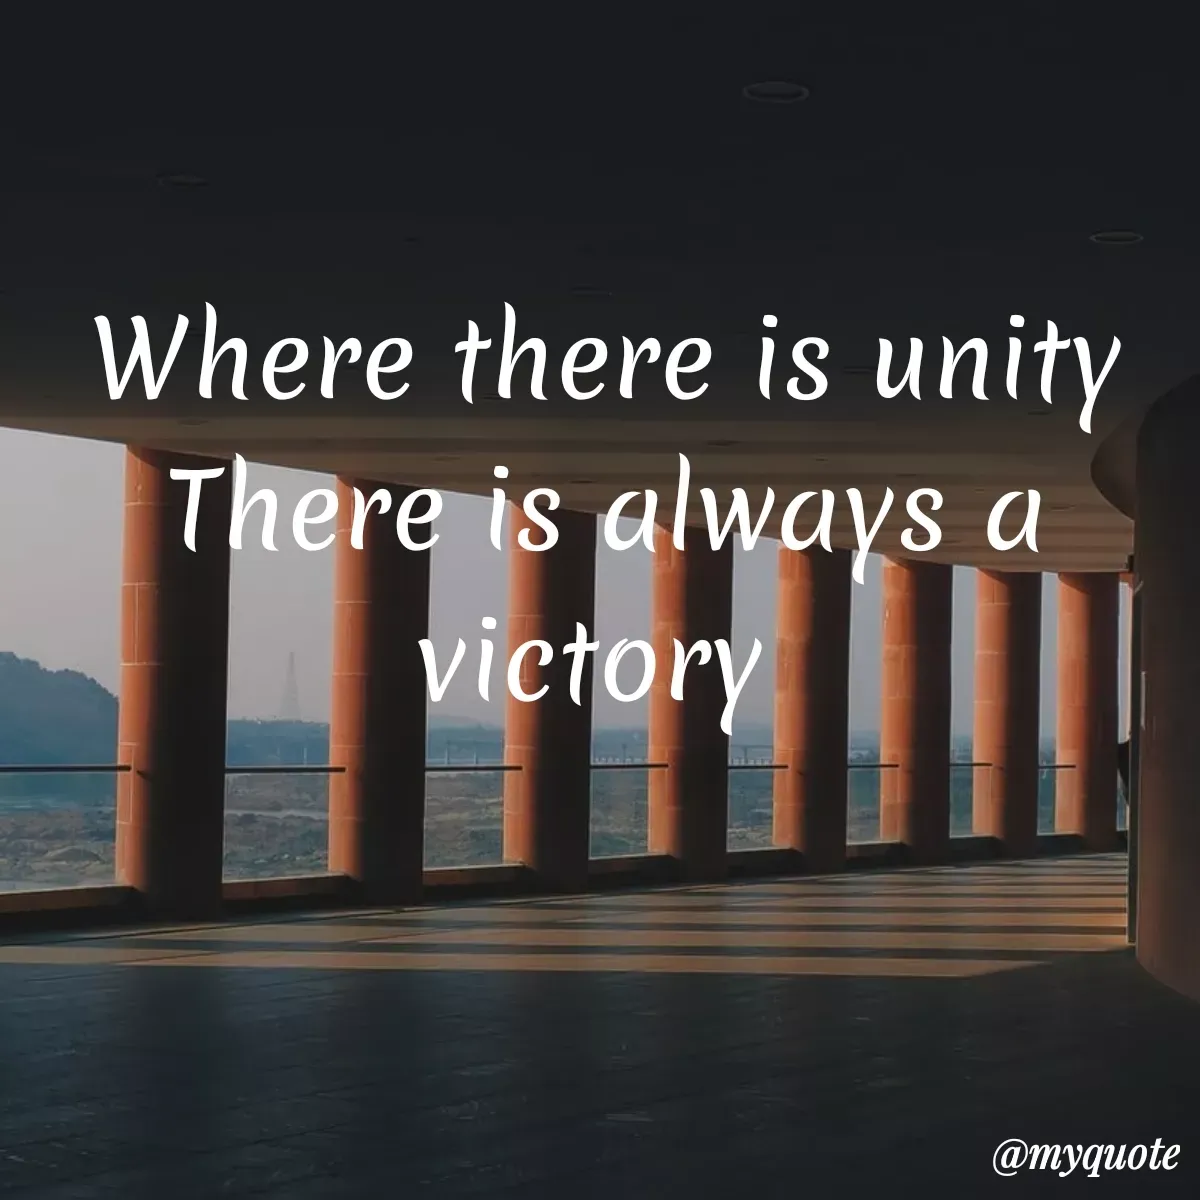 Quote by Maben Sisters - Where there is unity
There is always
victory
a
@тудиote
 - Made using Quotes Creator App, Post Maker App